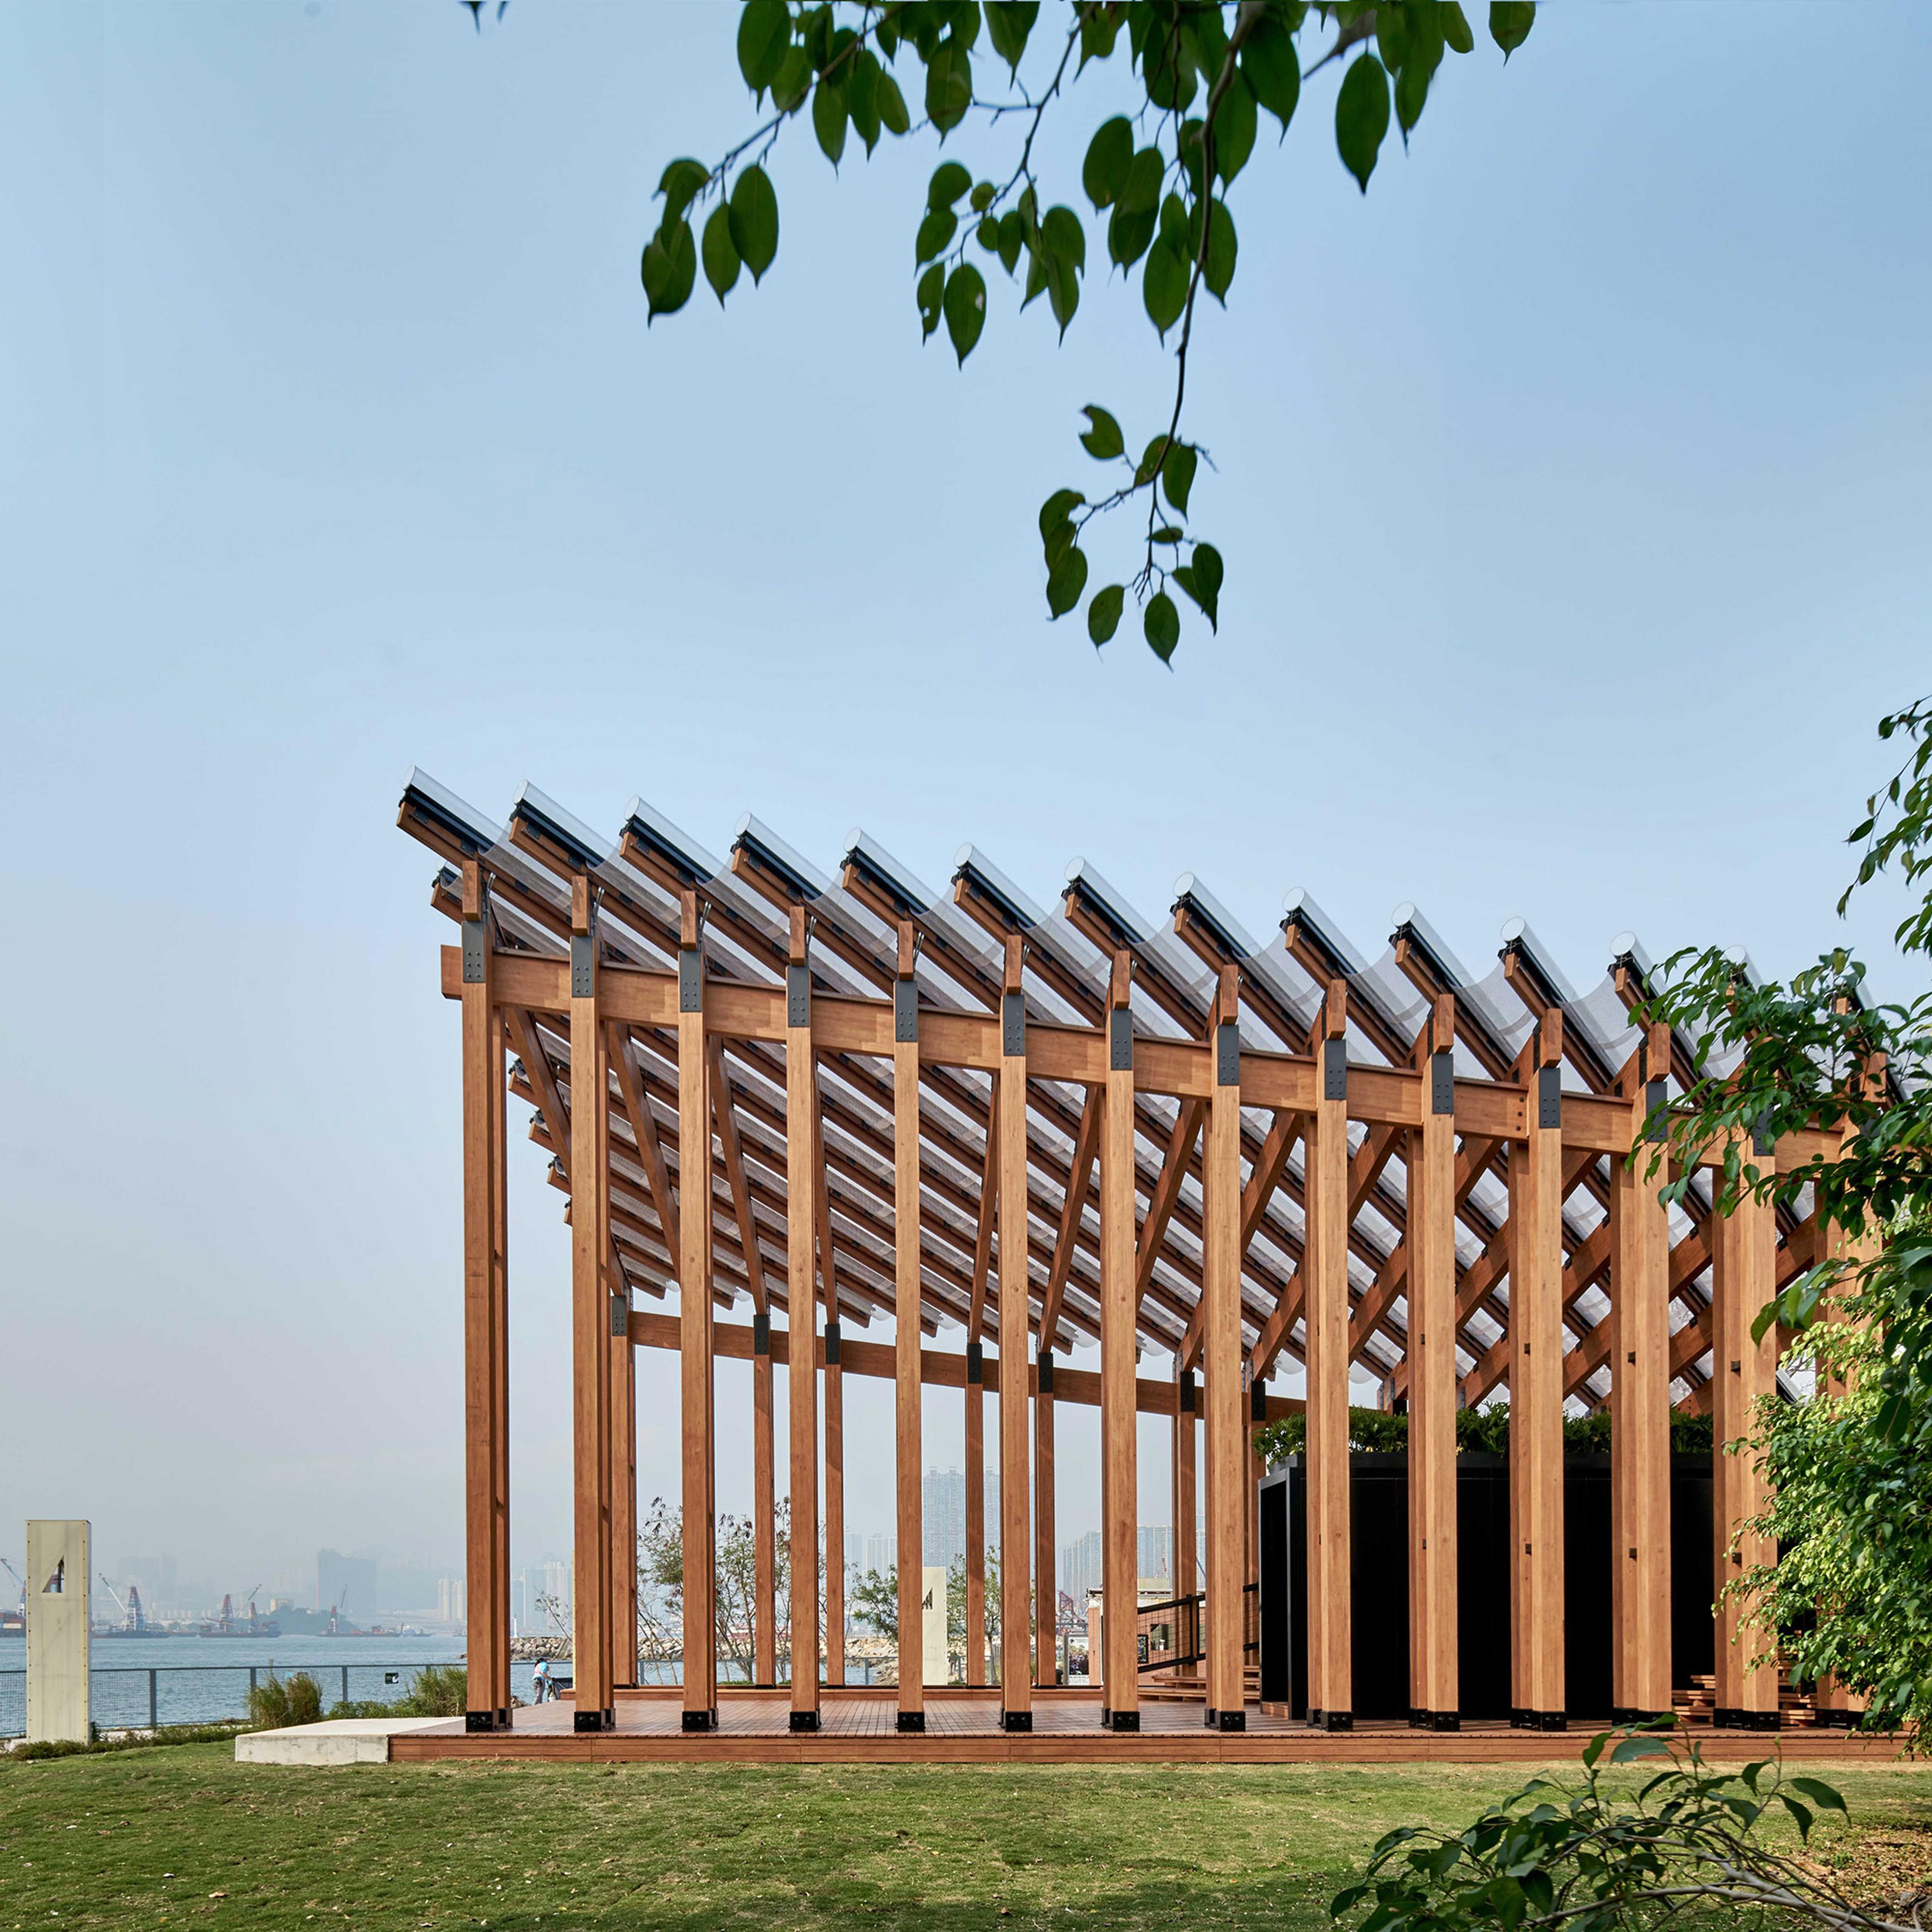 Outdoor pavilion by the harbour in front of trees